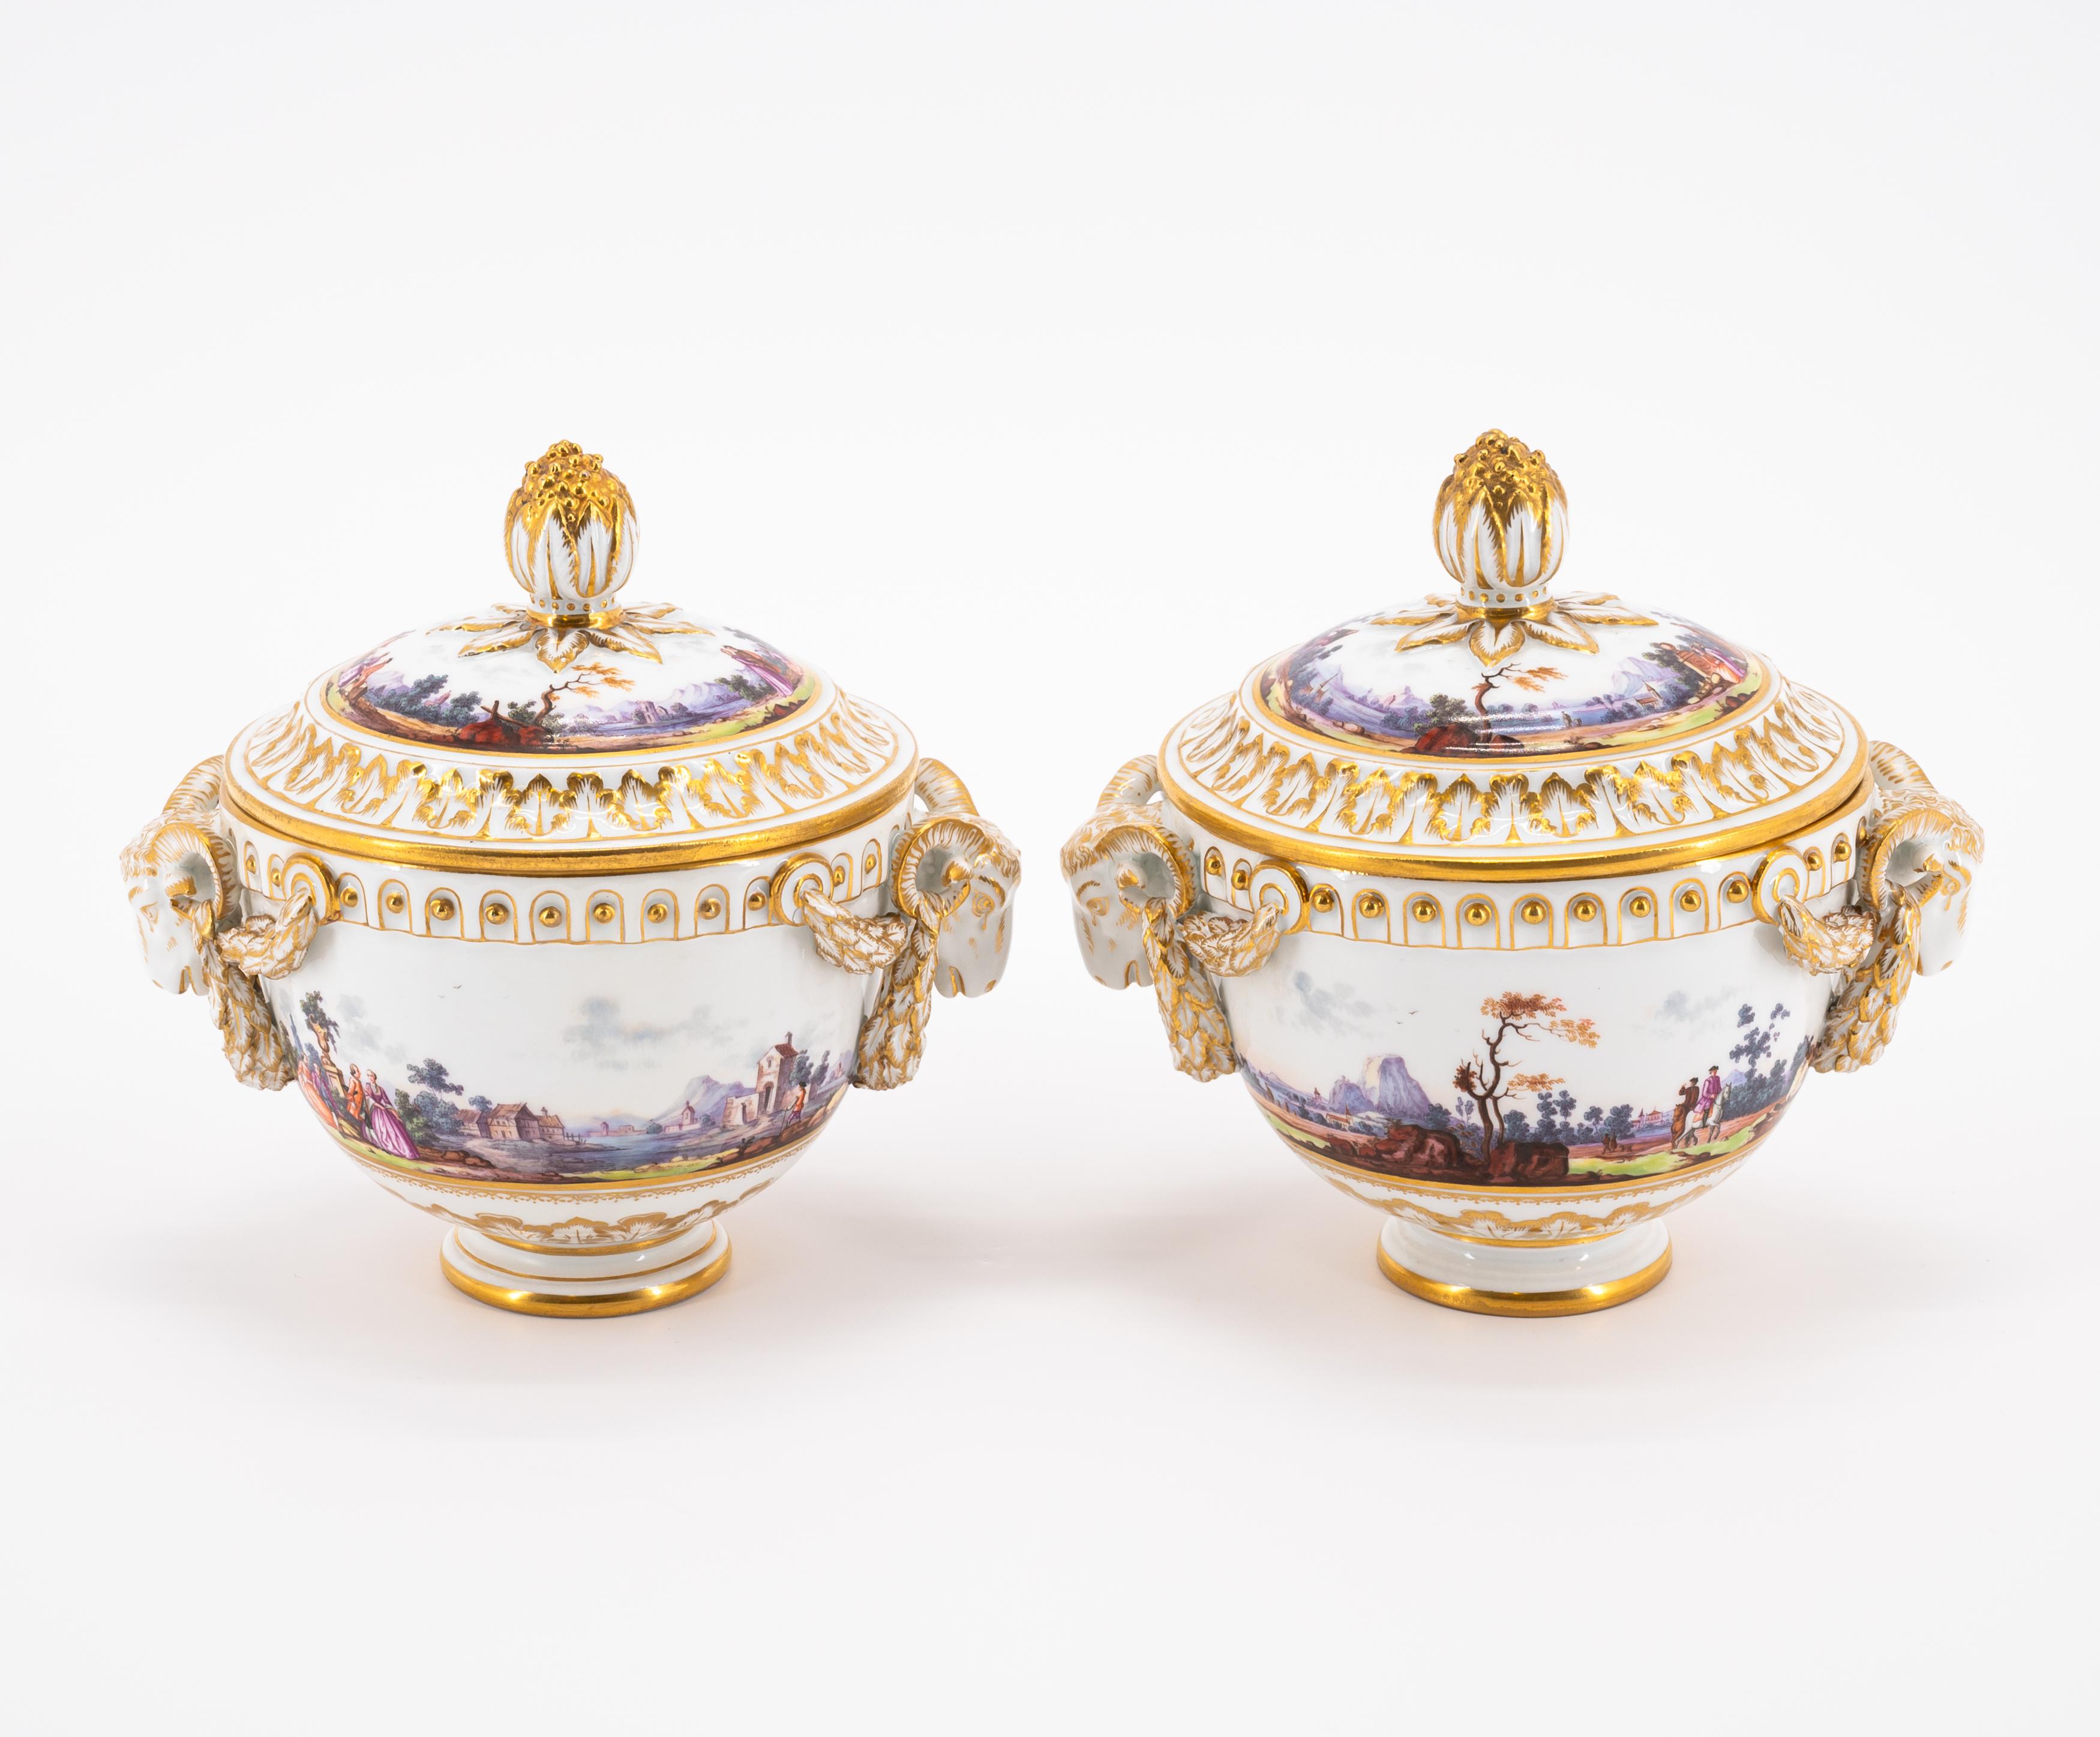 PAIR OF PORCELAIN LIDDED VESSELS WITH RAM DECORATION AND SURROUNDING LANDSCAPE PAINTINGS - Image 3 of 8